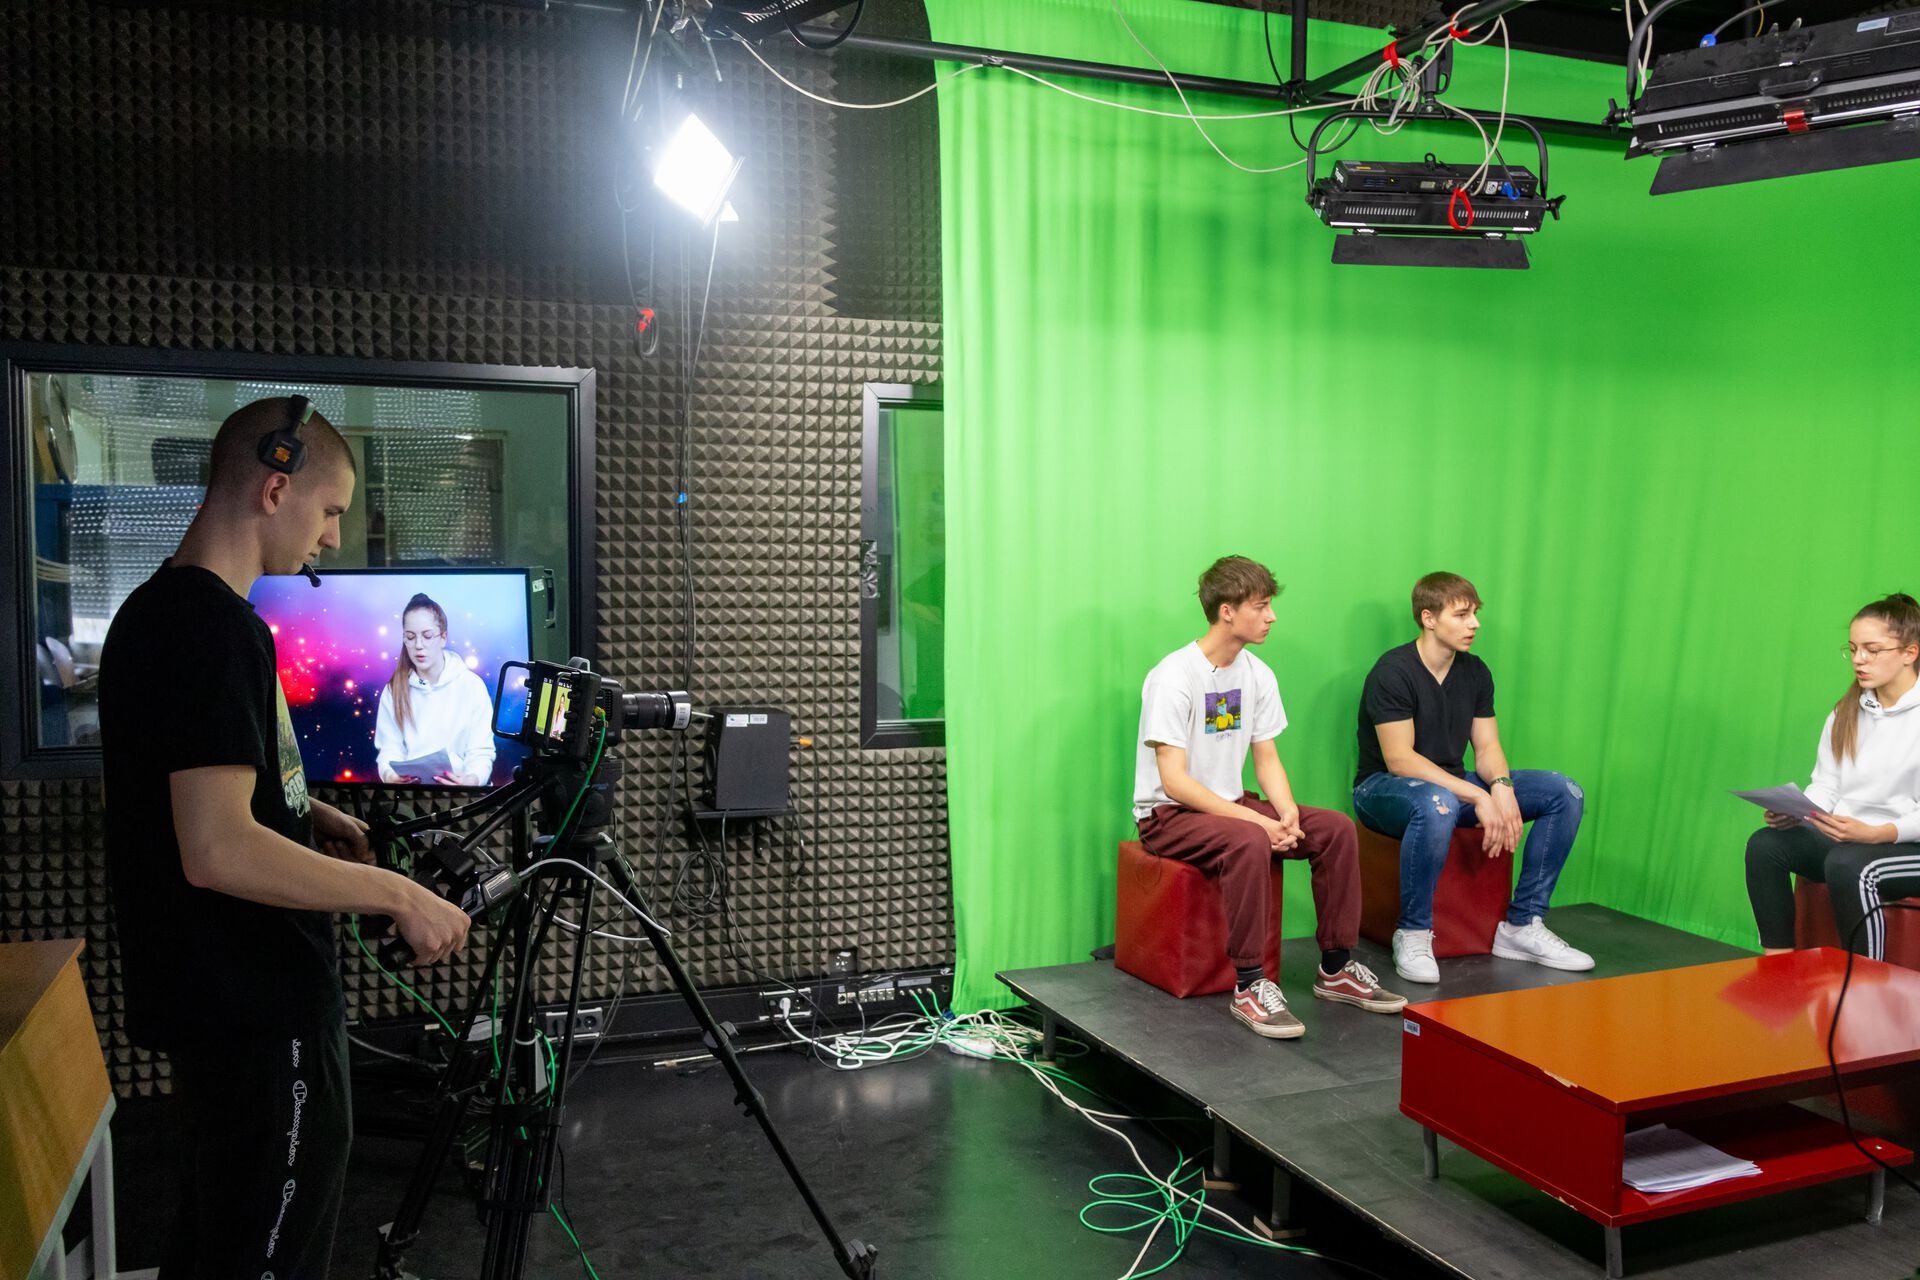 Three students in front of a green screen being filmed